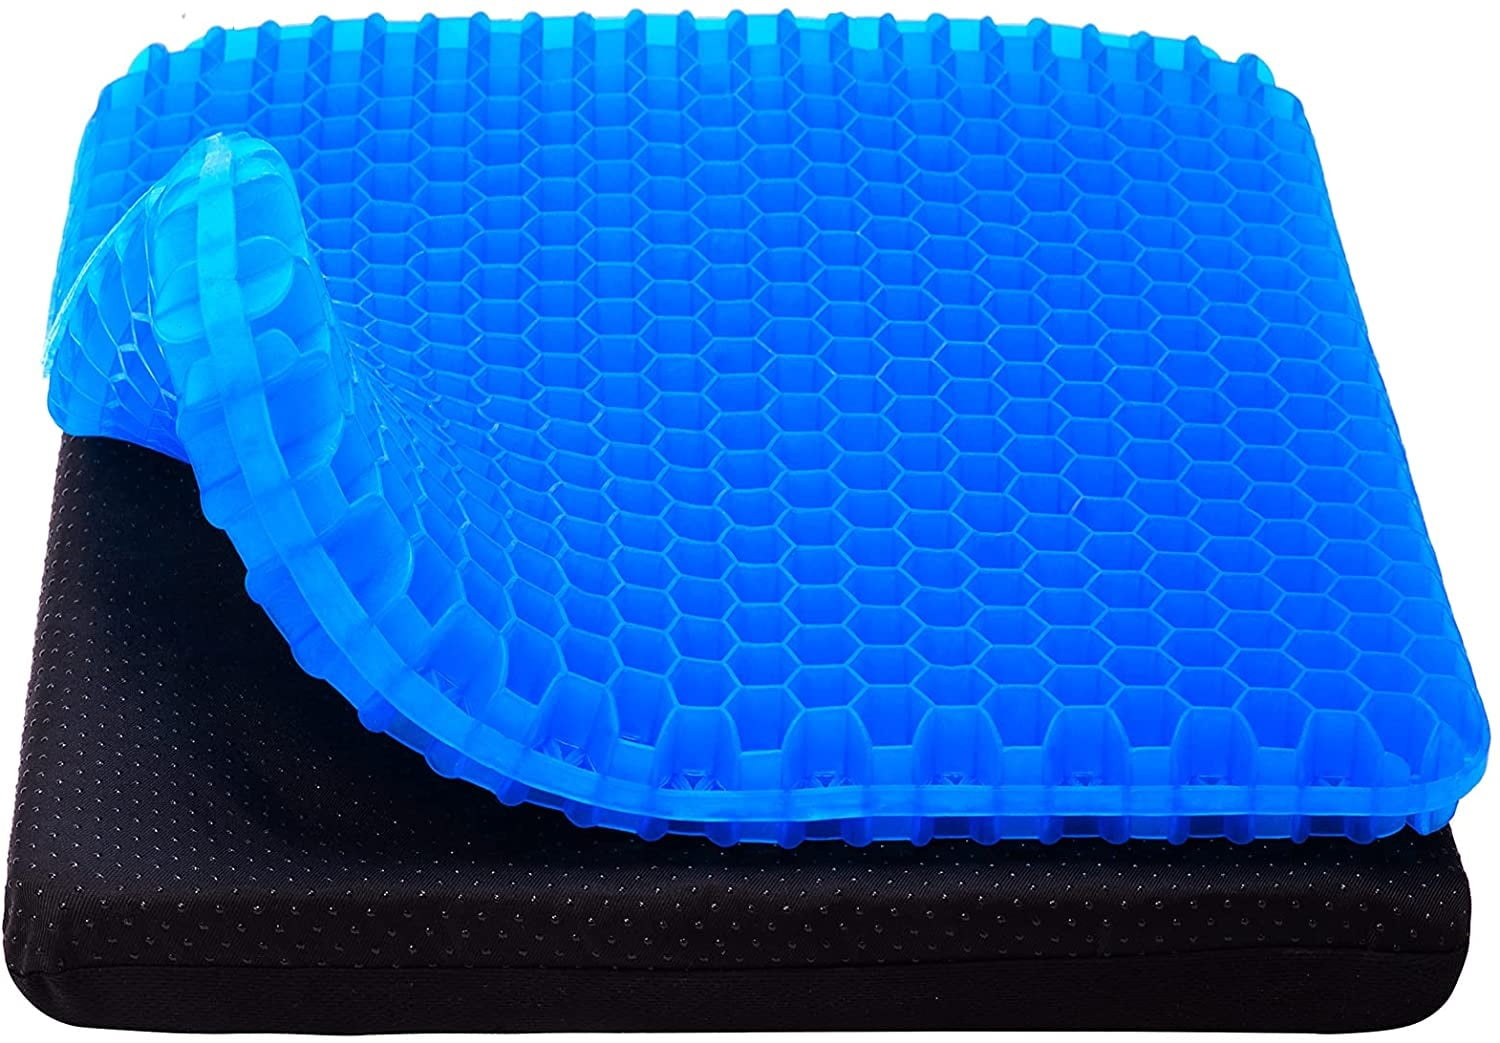  Gilbins Convoluted Egg Crate Foam Chair Cushion, Seat Cushion,  Car Seat Cushion, Office Chair Cushion or Wheelchair Cushion to Relieve  Back Pain Wheelchair and Recliner Chair Pads (Without Cover) : Office